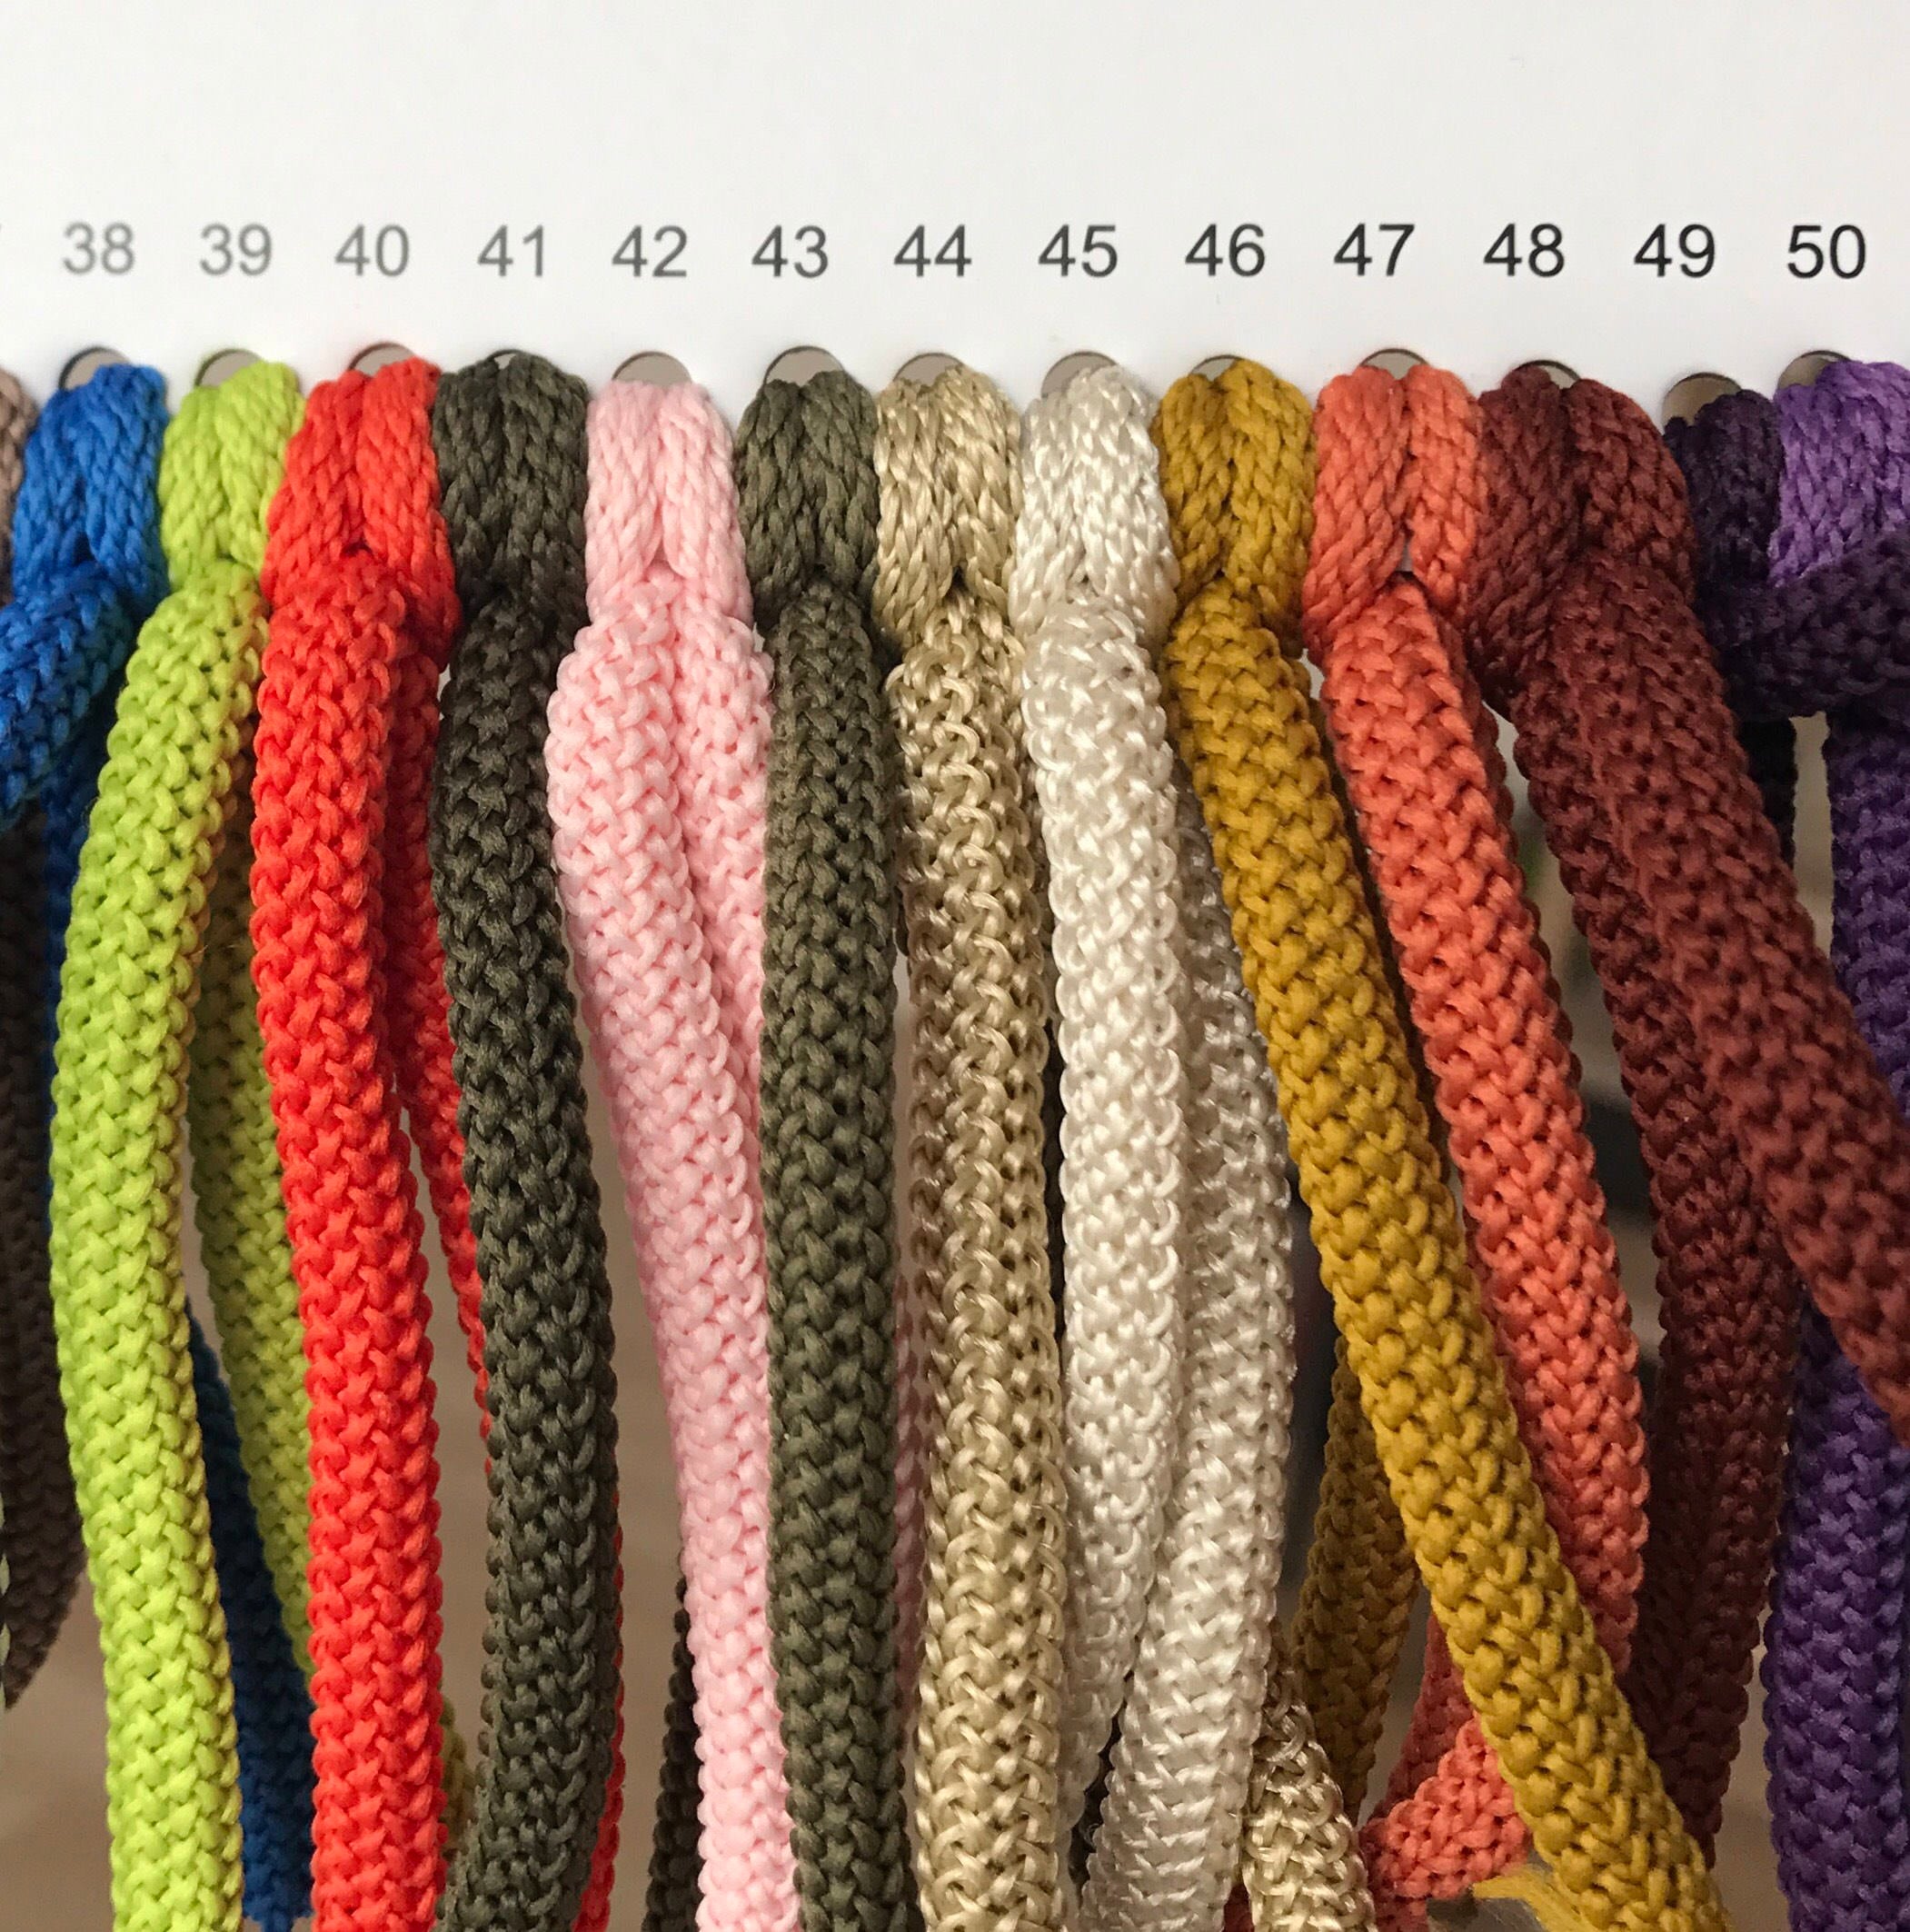 Buy Polyester Rope, Colored Rope 6mm, Soft Cord Macrame, Strong Cord,  Crochet Yarn, Polyester Rope, Nylon Colored Cord, Craft Cotton Rope Online  in India 